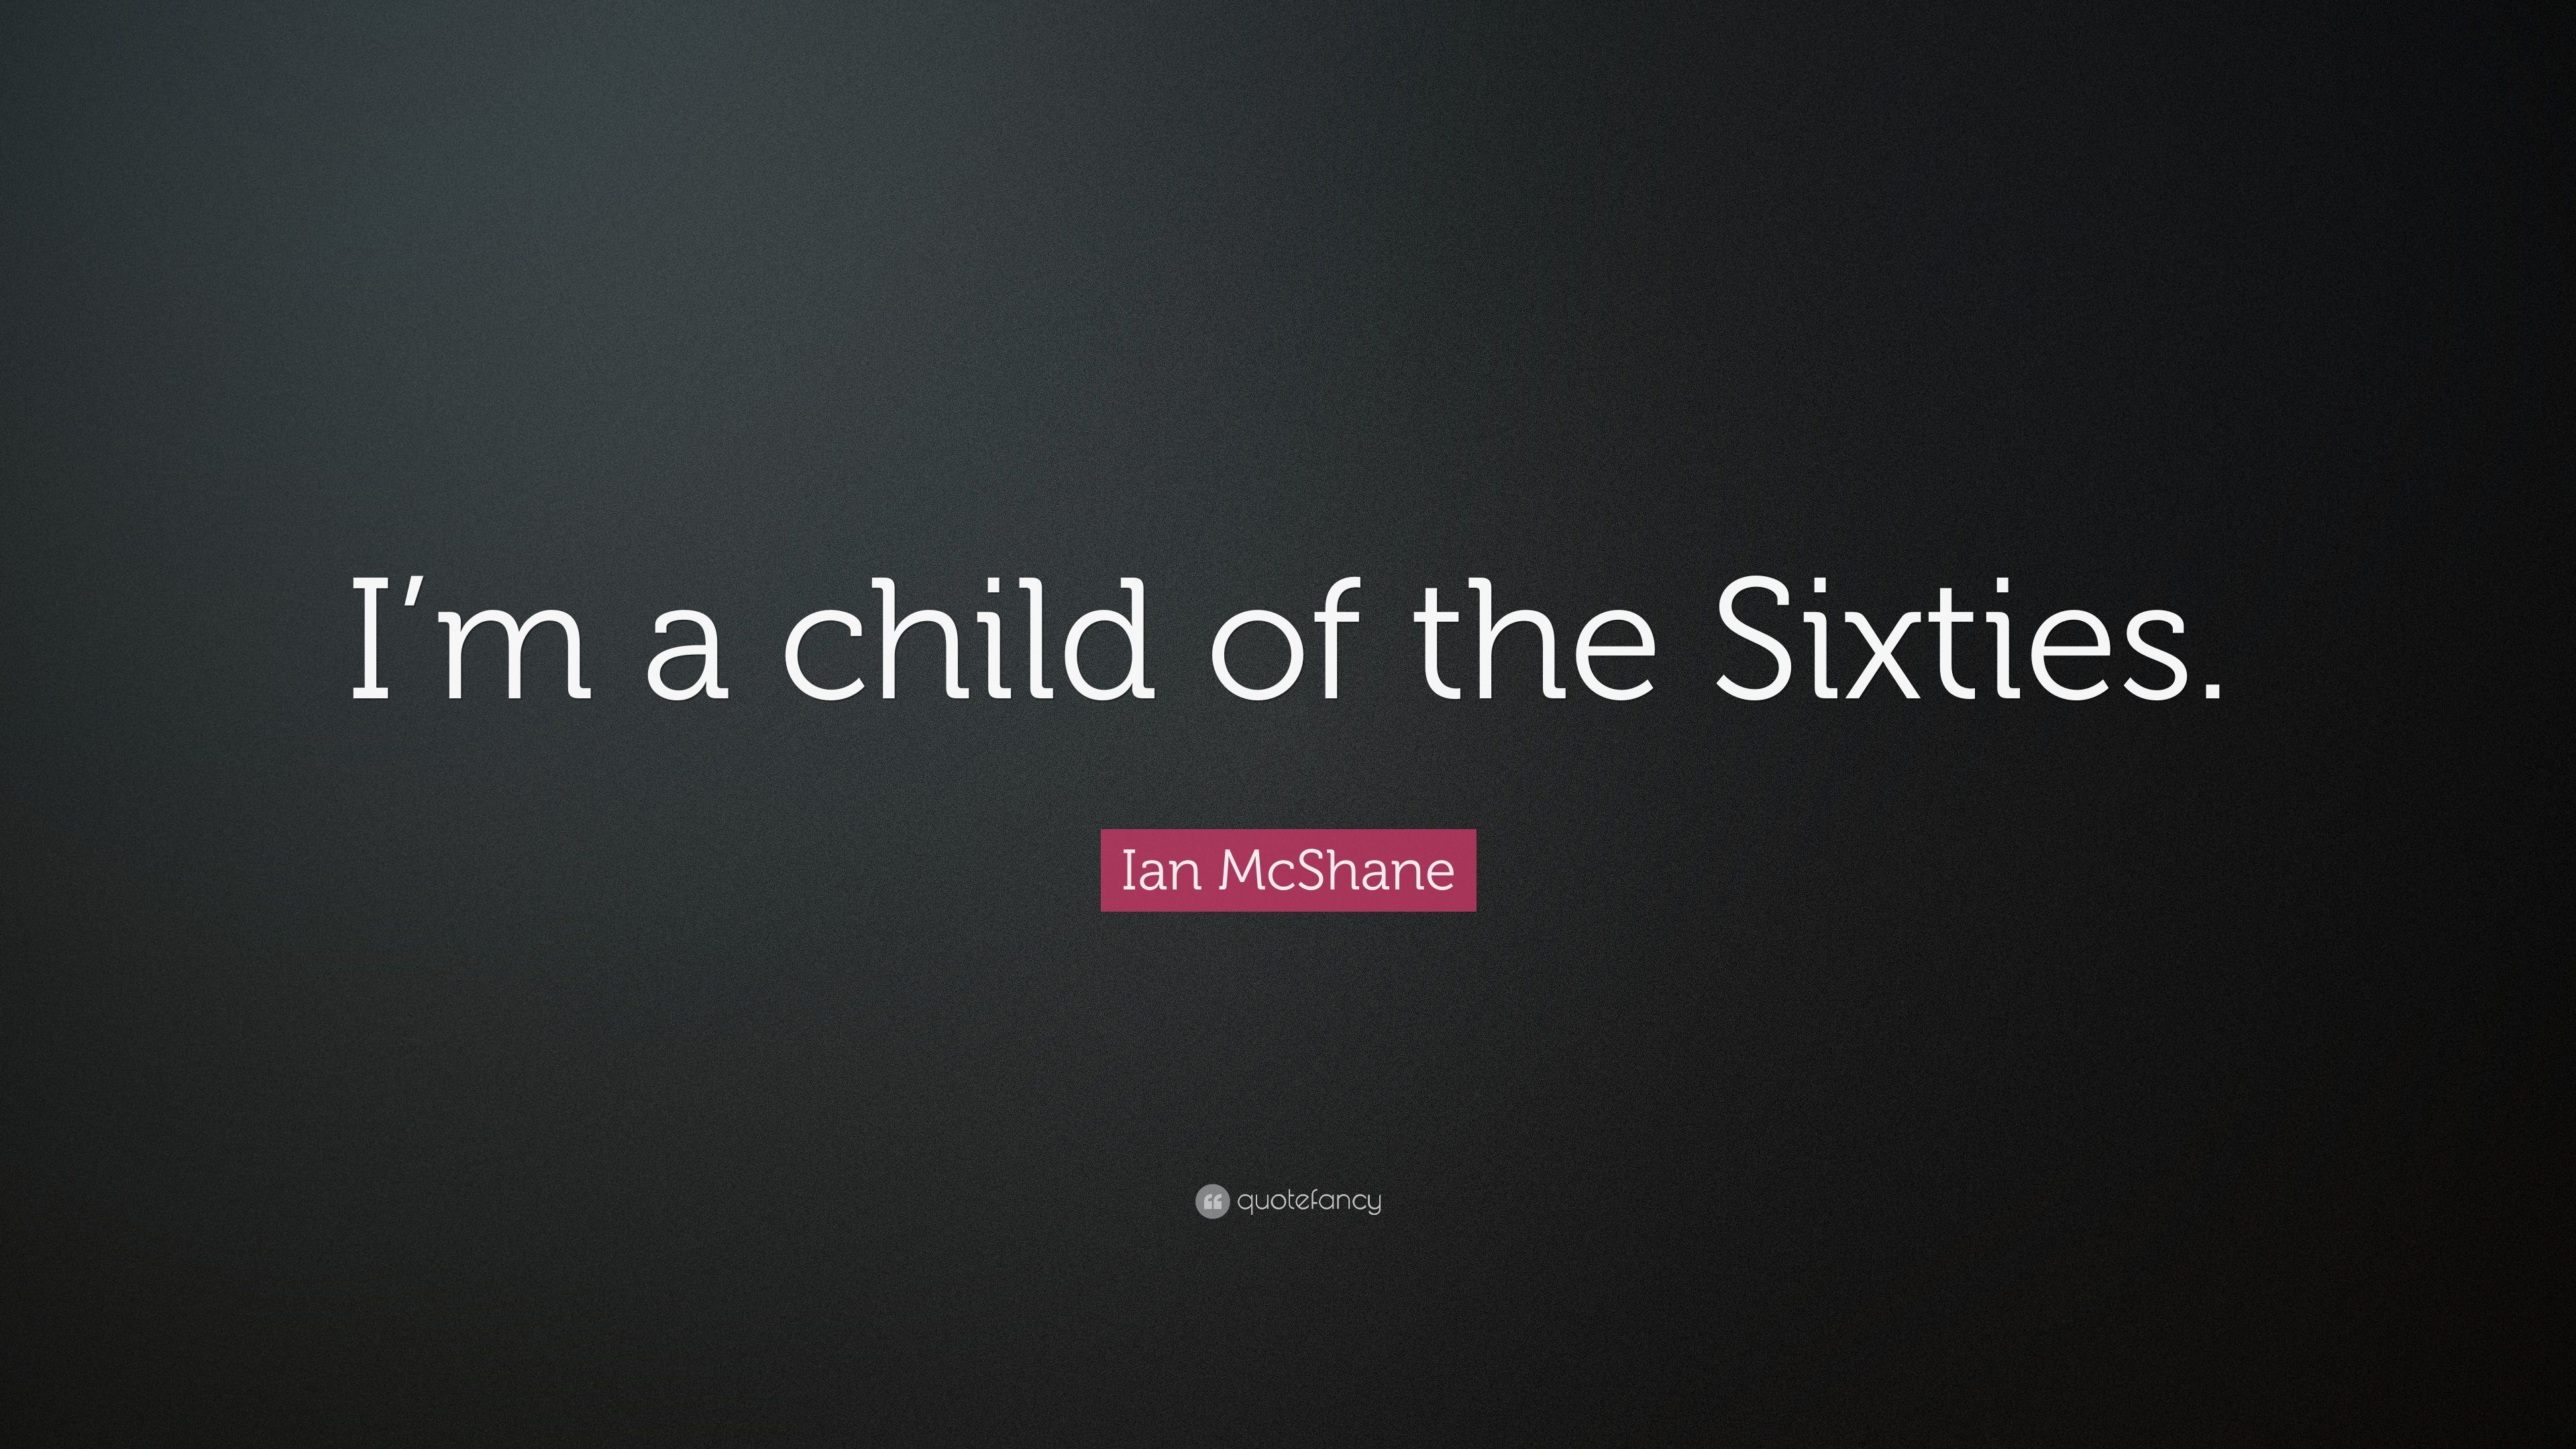 Ian McShane Quote: “I'm a child of the Sixties.” 7 wallpaper